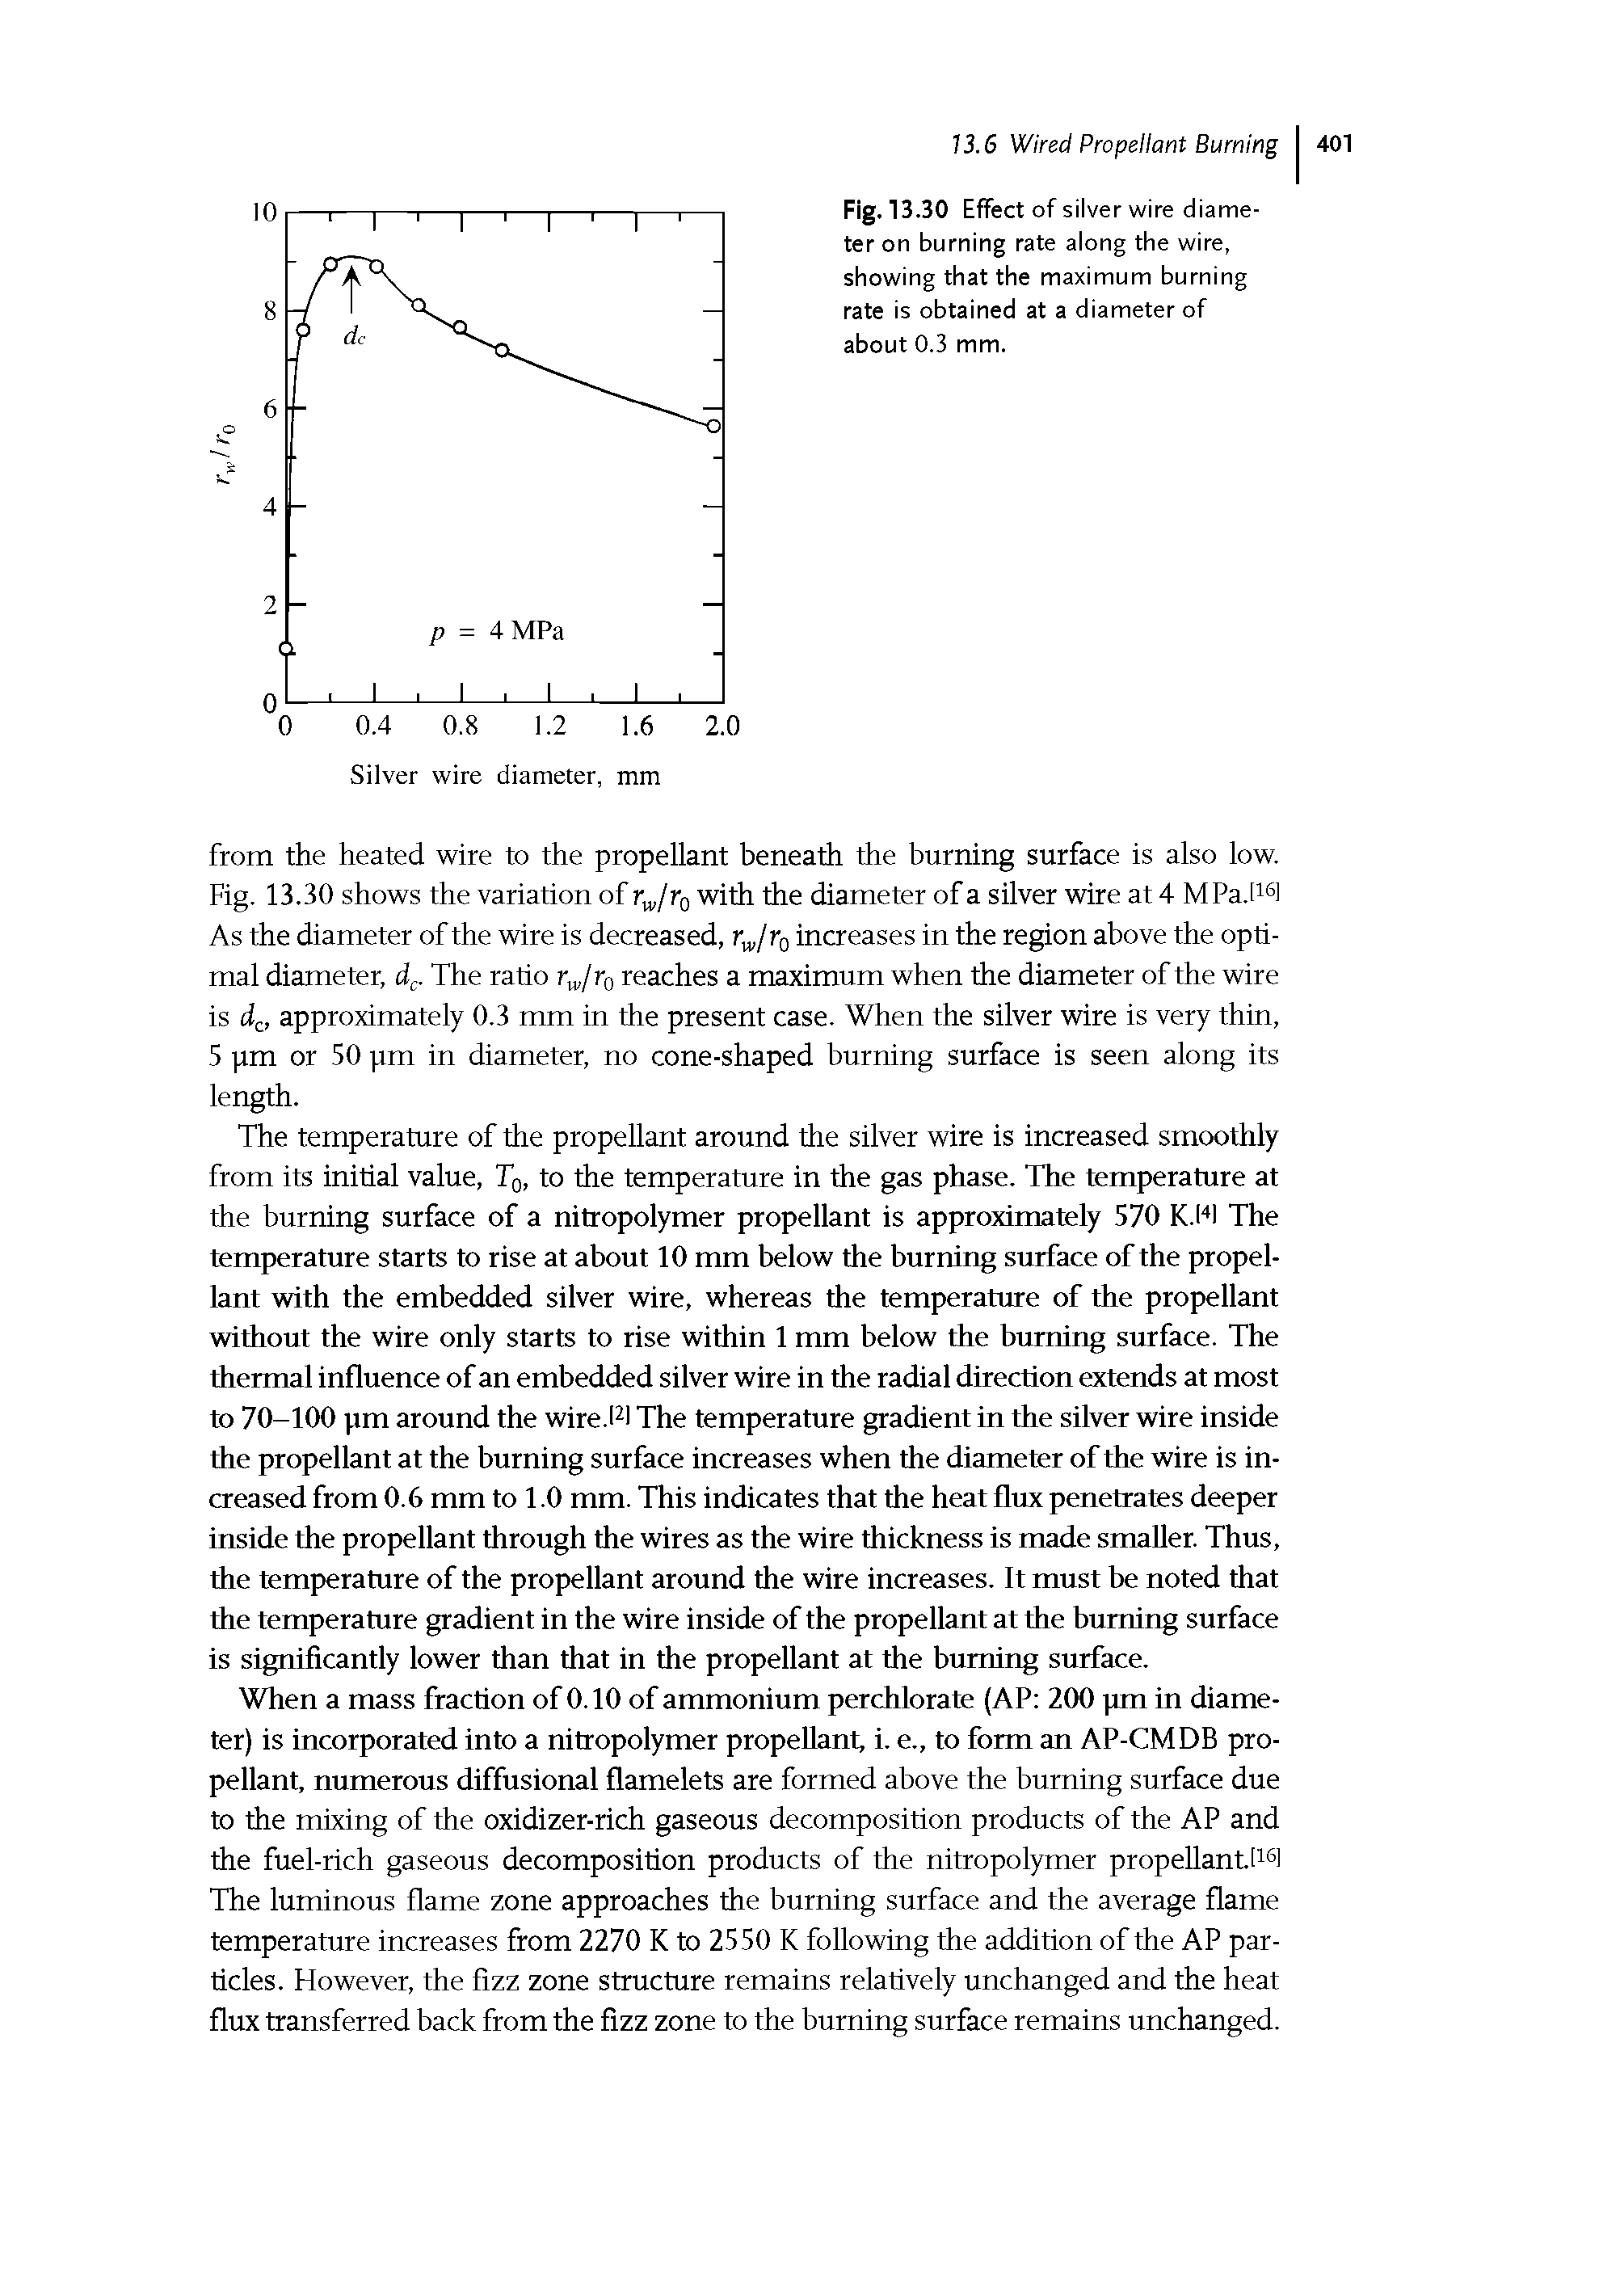 Fig. 13.30 Effect of silver wire diameter on burning rate along the wire, showing that the maximum burning rate is obtained at a diameter of about 0.3 mm.